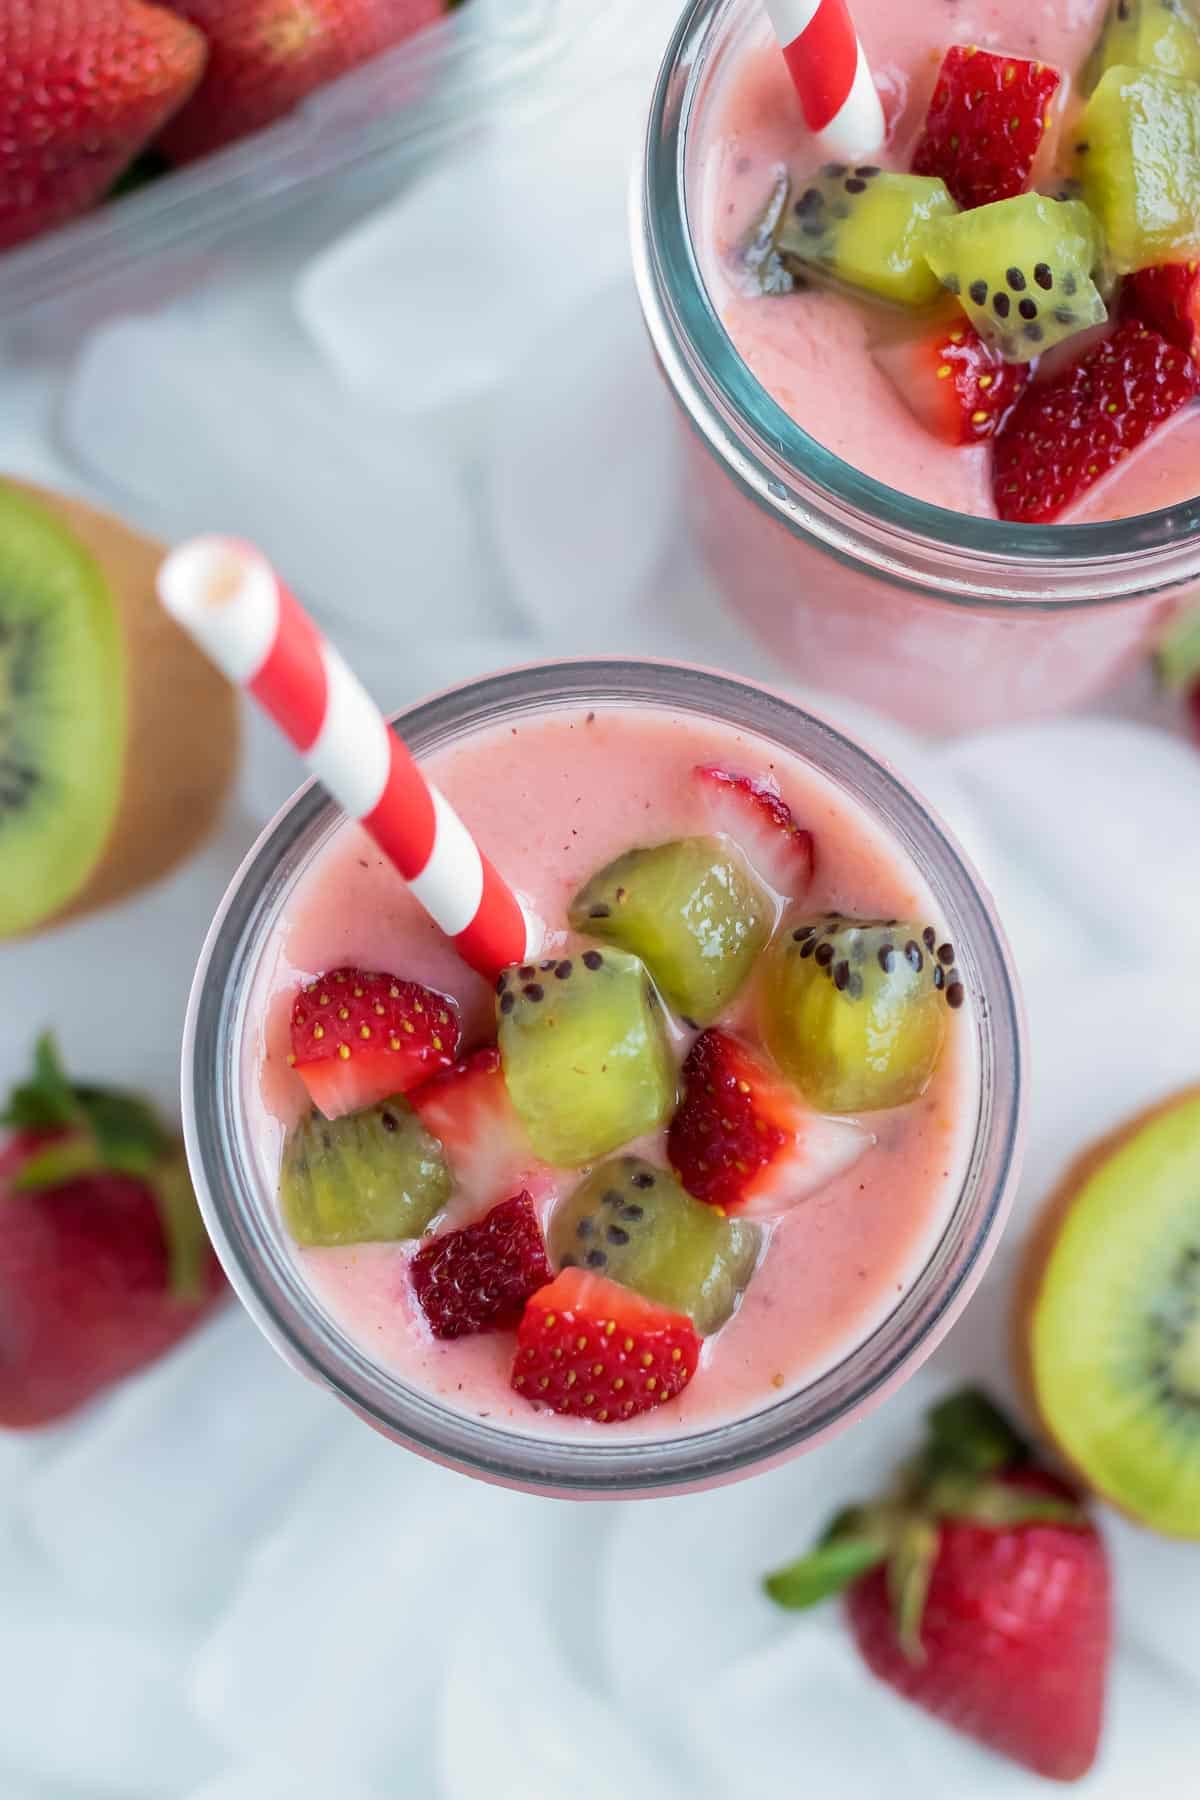 A strawberry kiwi smoothie is served on the counter.